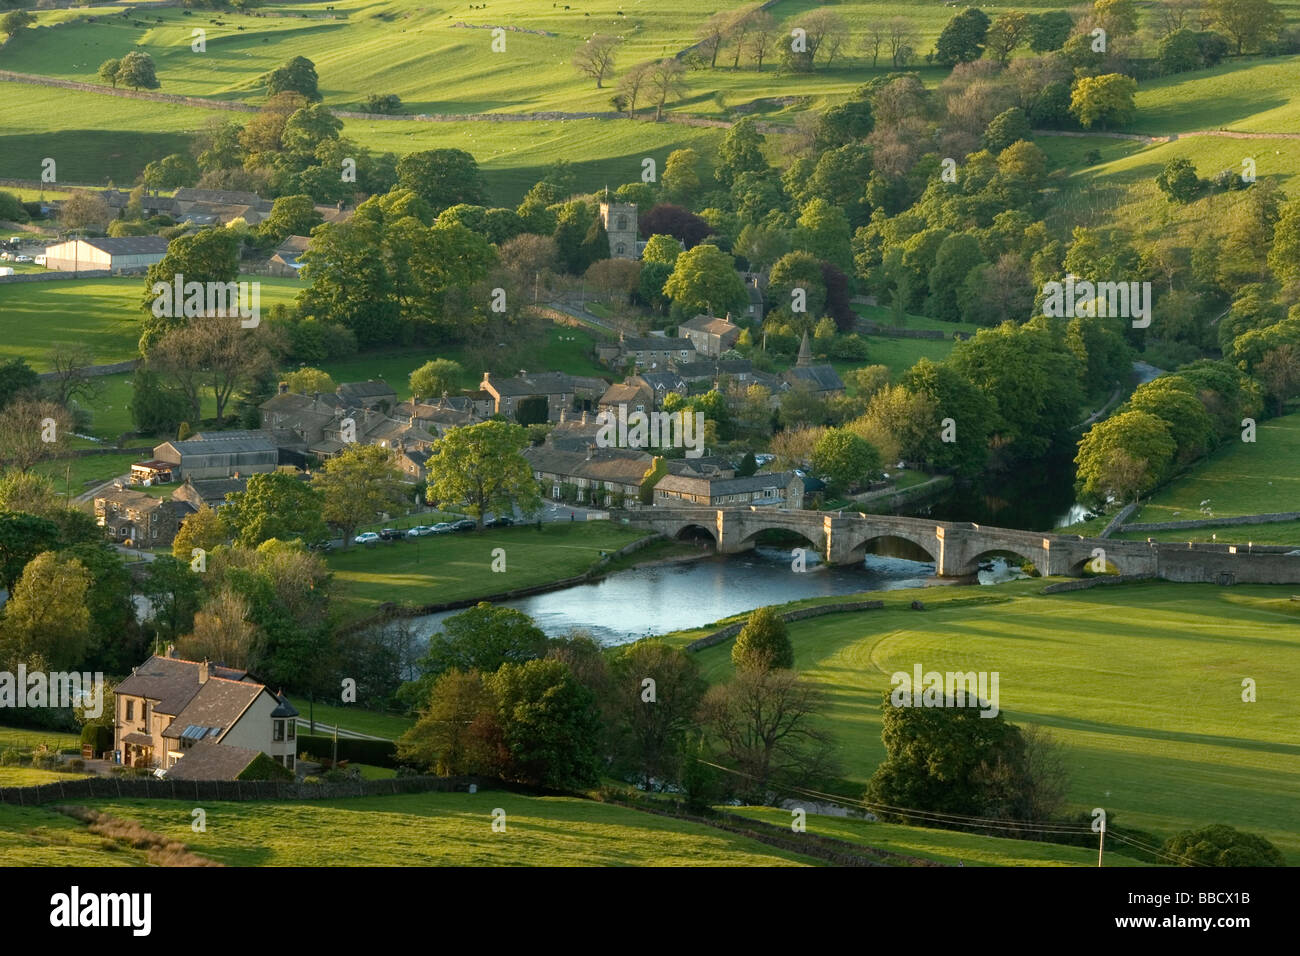 A view of the bridge and River Wharfe at the village of Burnsall, in Wharfedale, Yorkshire Dales, from the Burnsall Fells Stock Photo